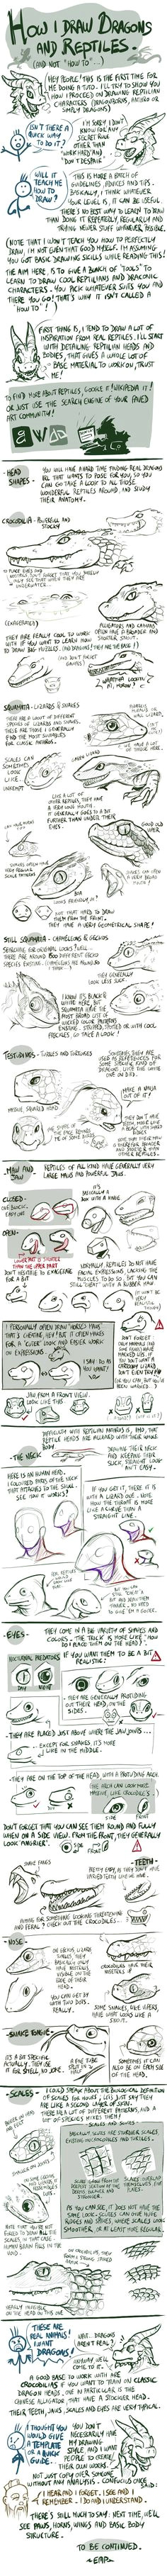 Drawing Dragons Tutorial 85 Best Drawing Dragons Tutorials Images Drawings Sketches Dragons